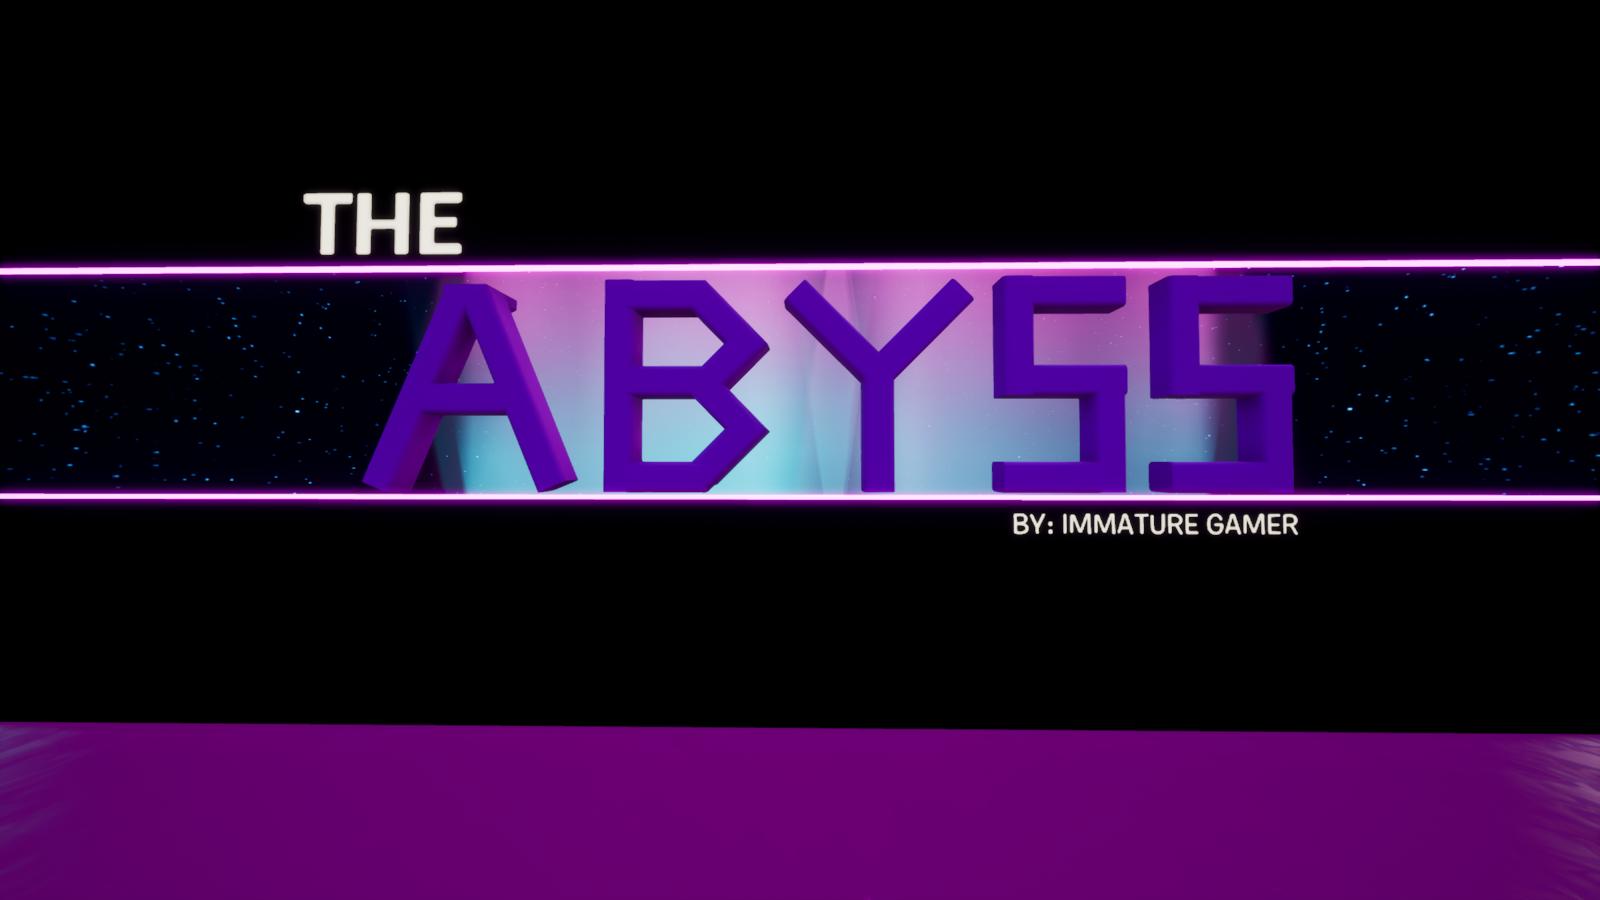 THE ABYSS: 1V1 TOURNAMENT